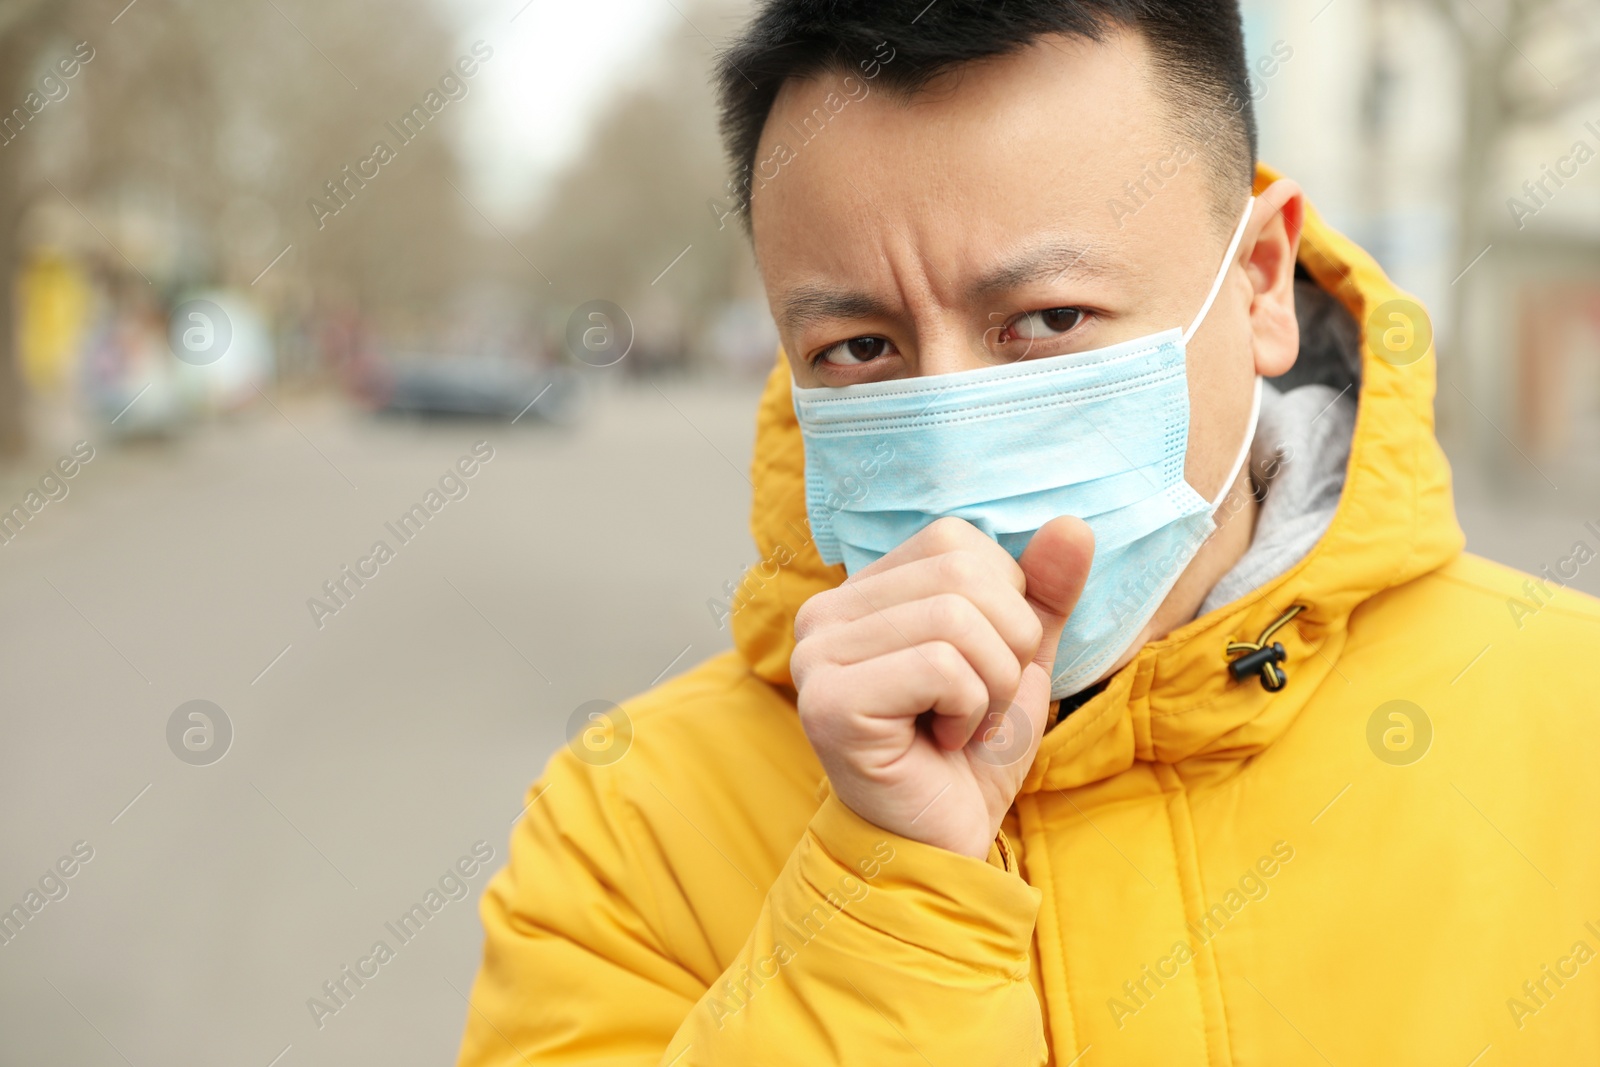 Photo of Asian man wearing medical mask on city street, space for text. Virus outbreak